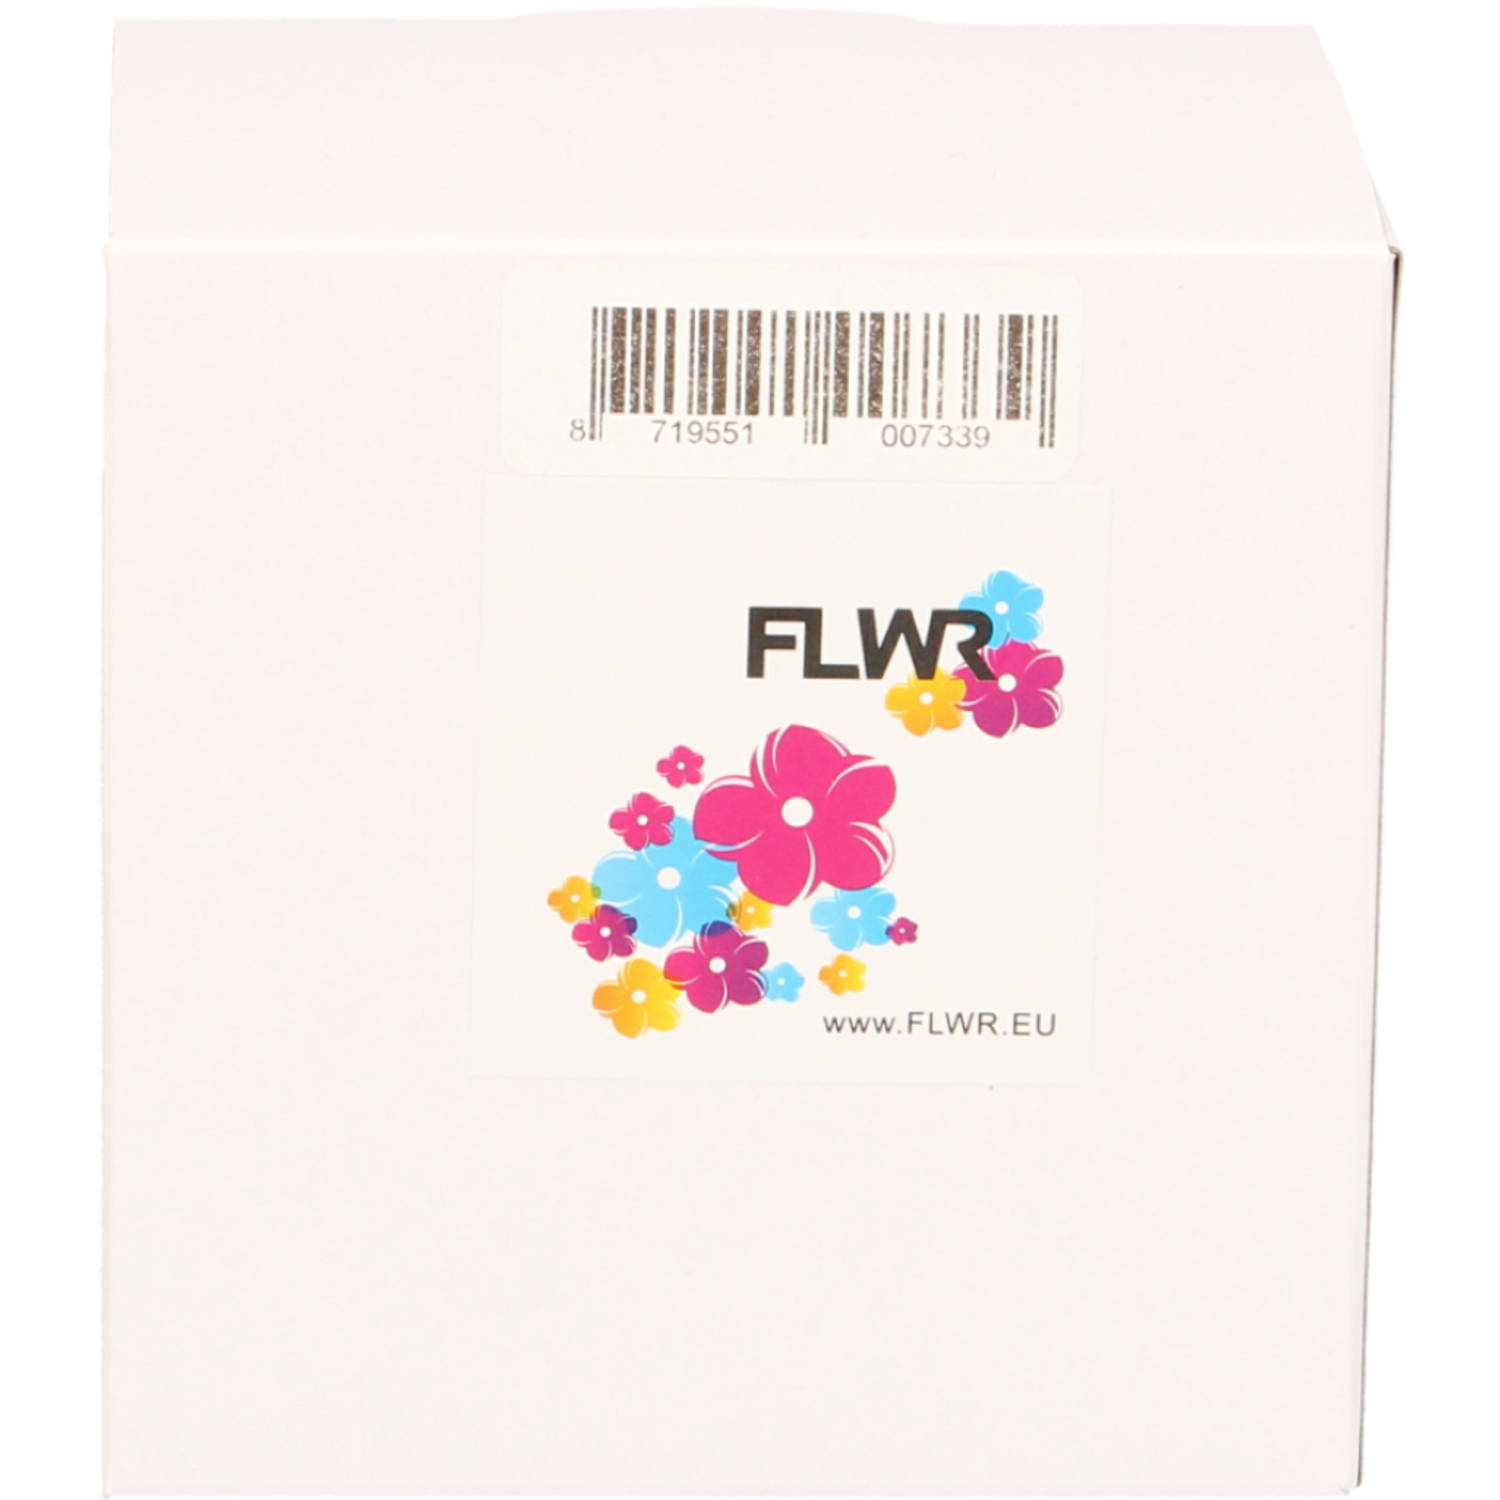 FLWR Brother DK-22205 x 62 mm 30.48 M wit labels